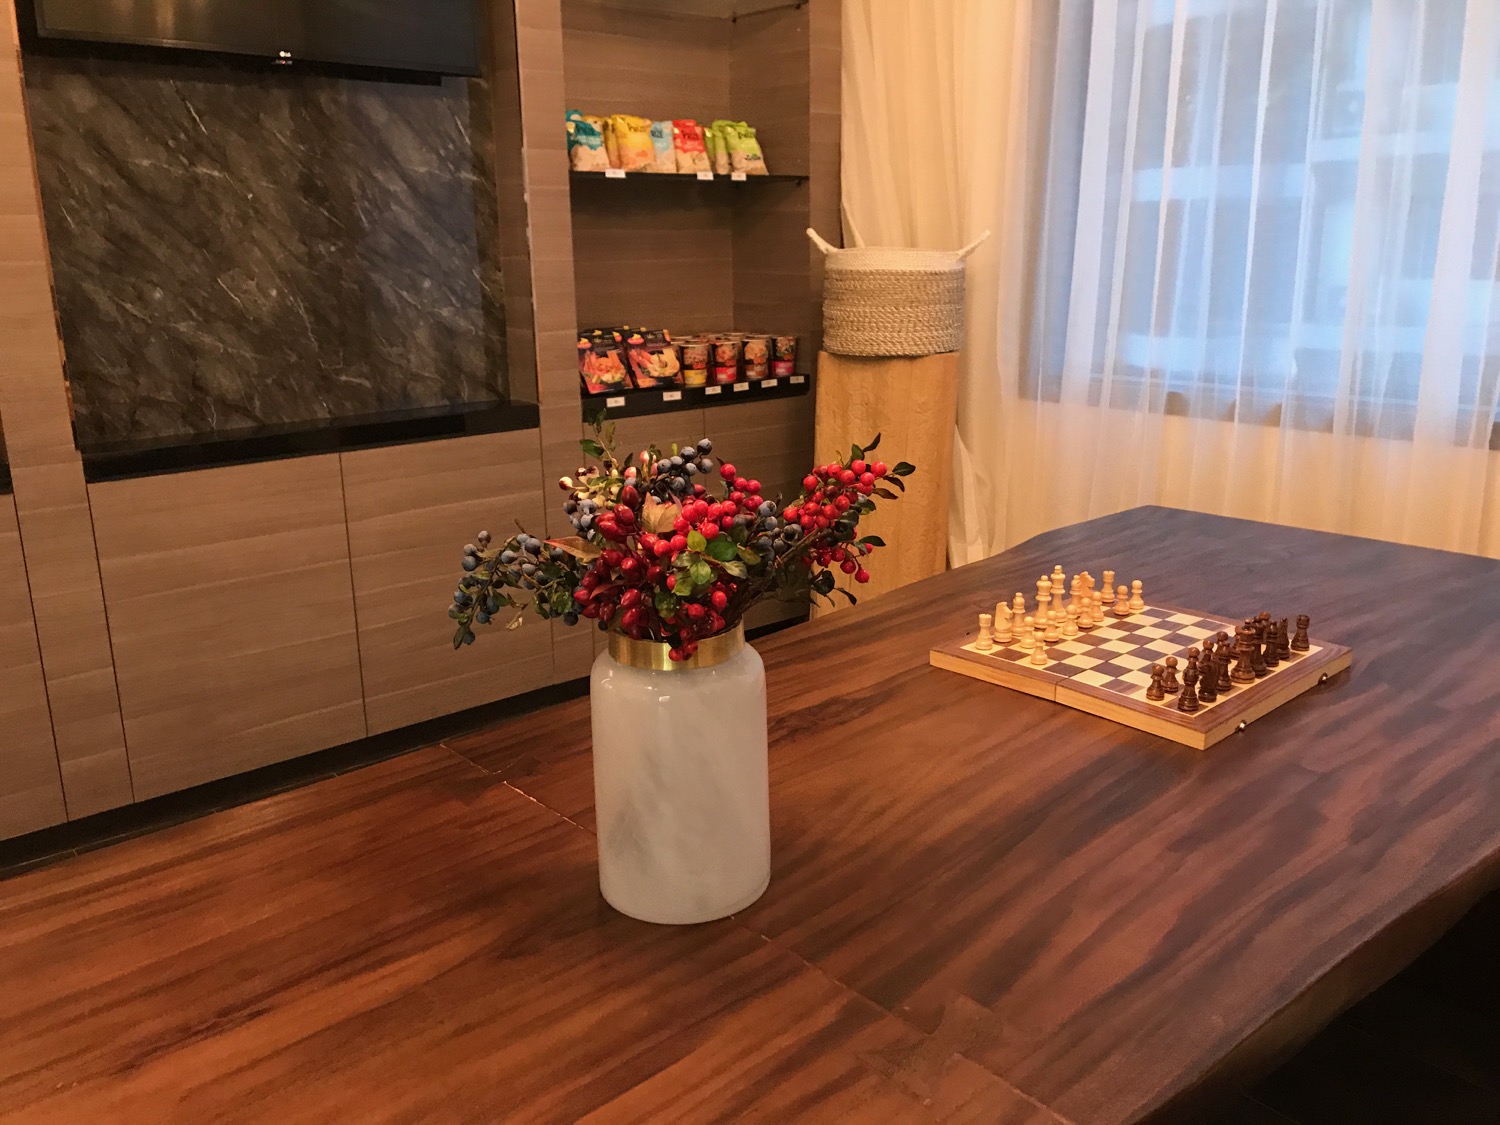 a vase with flowers on a table with chess board and a tv